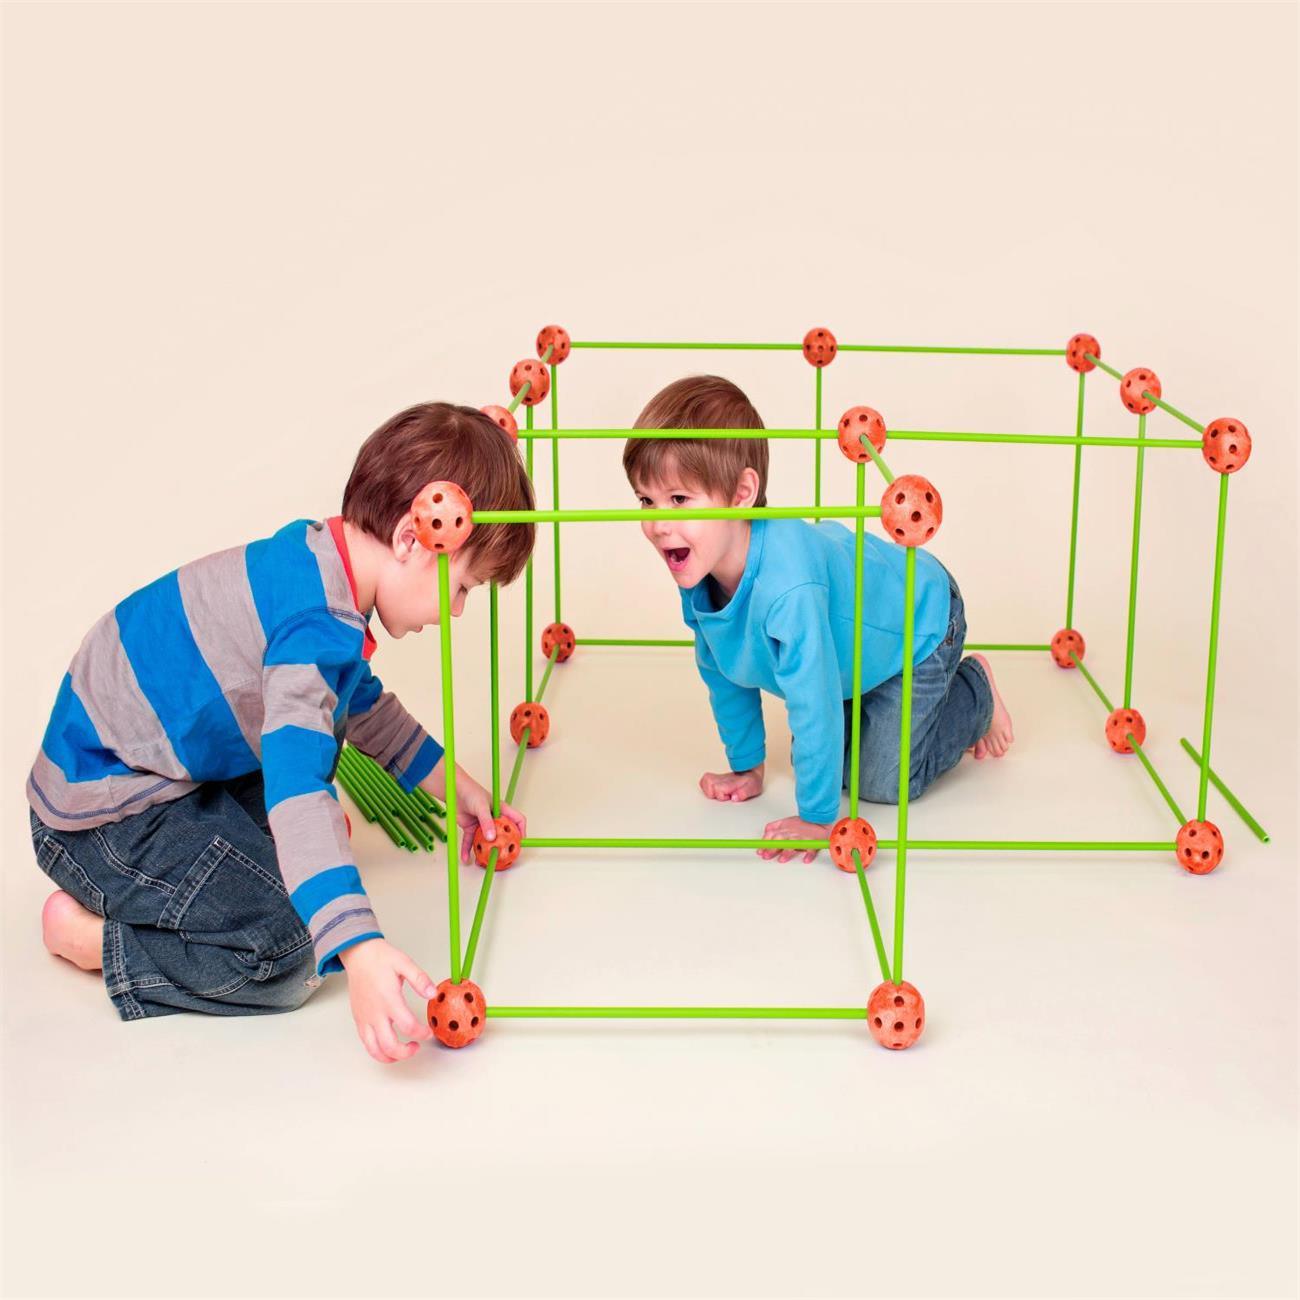 10 Indoor Fort-Building Kits That Kids Will Love